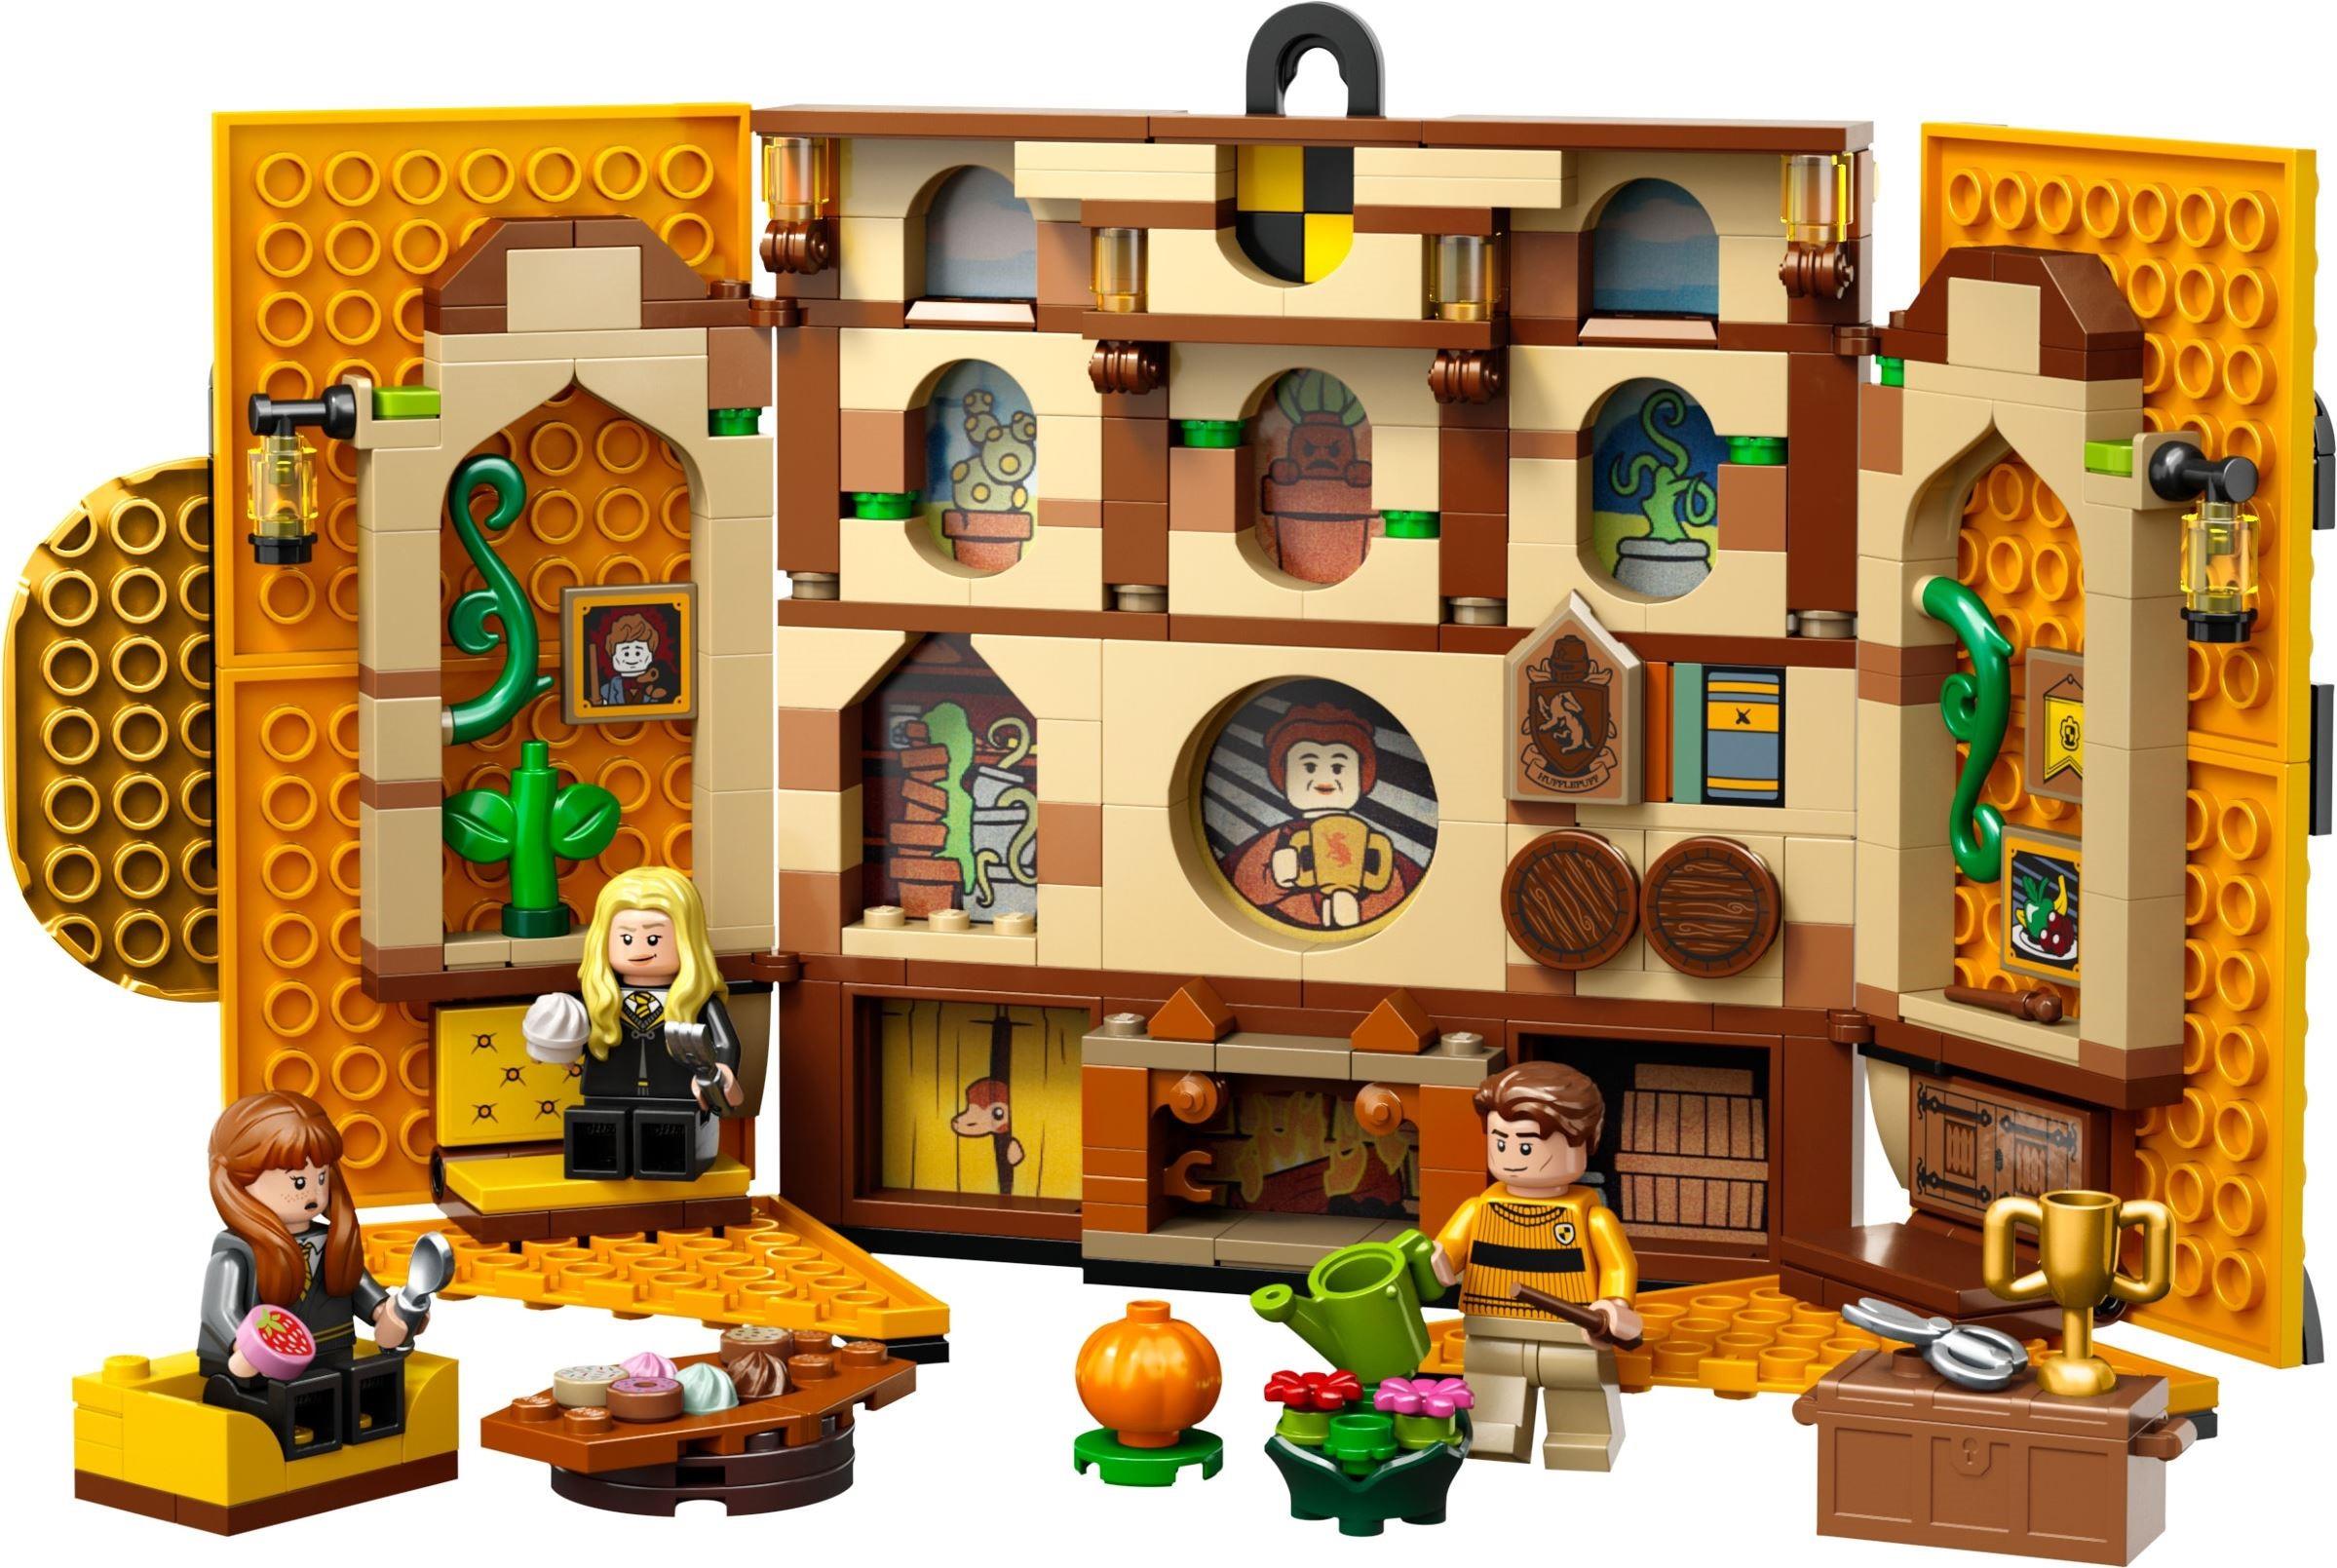 Brand new for March 2023: LEGO Harry Potter House Banner 76409, 76410,  76411 and 76412! 